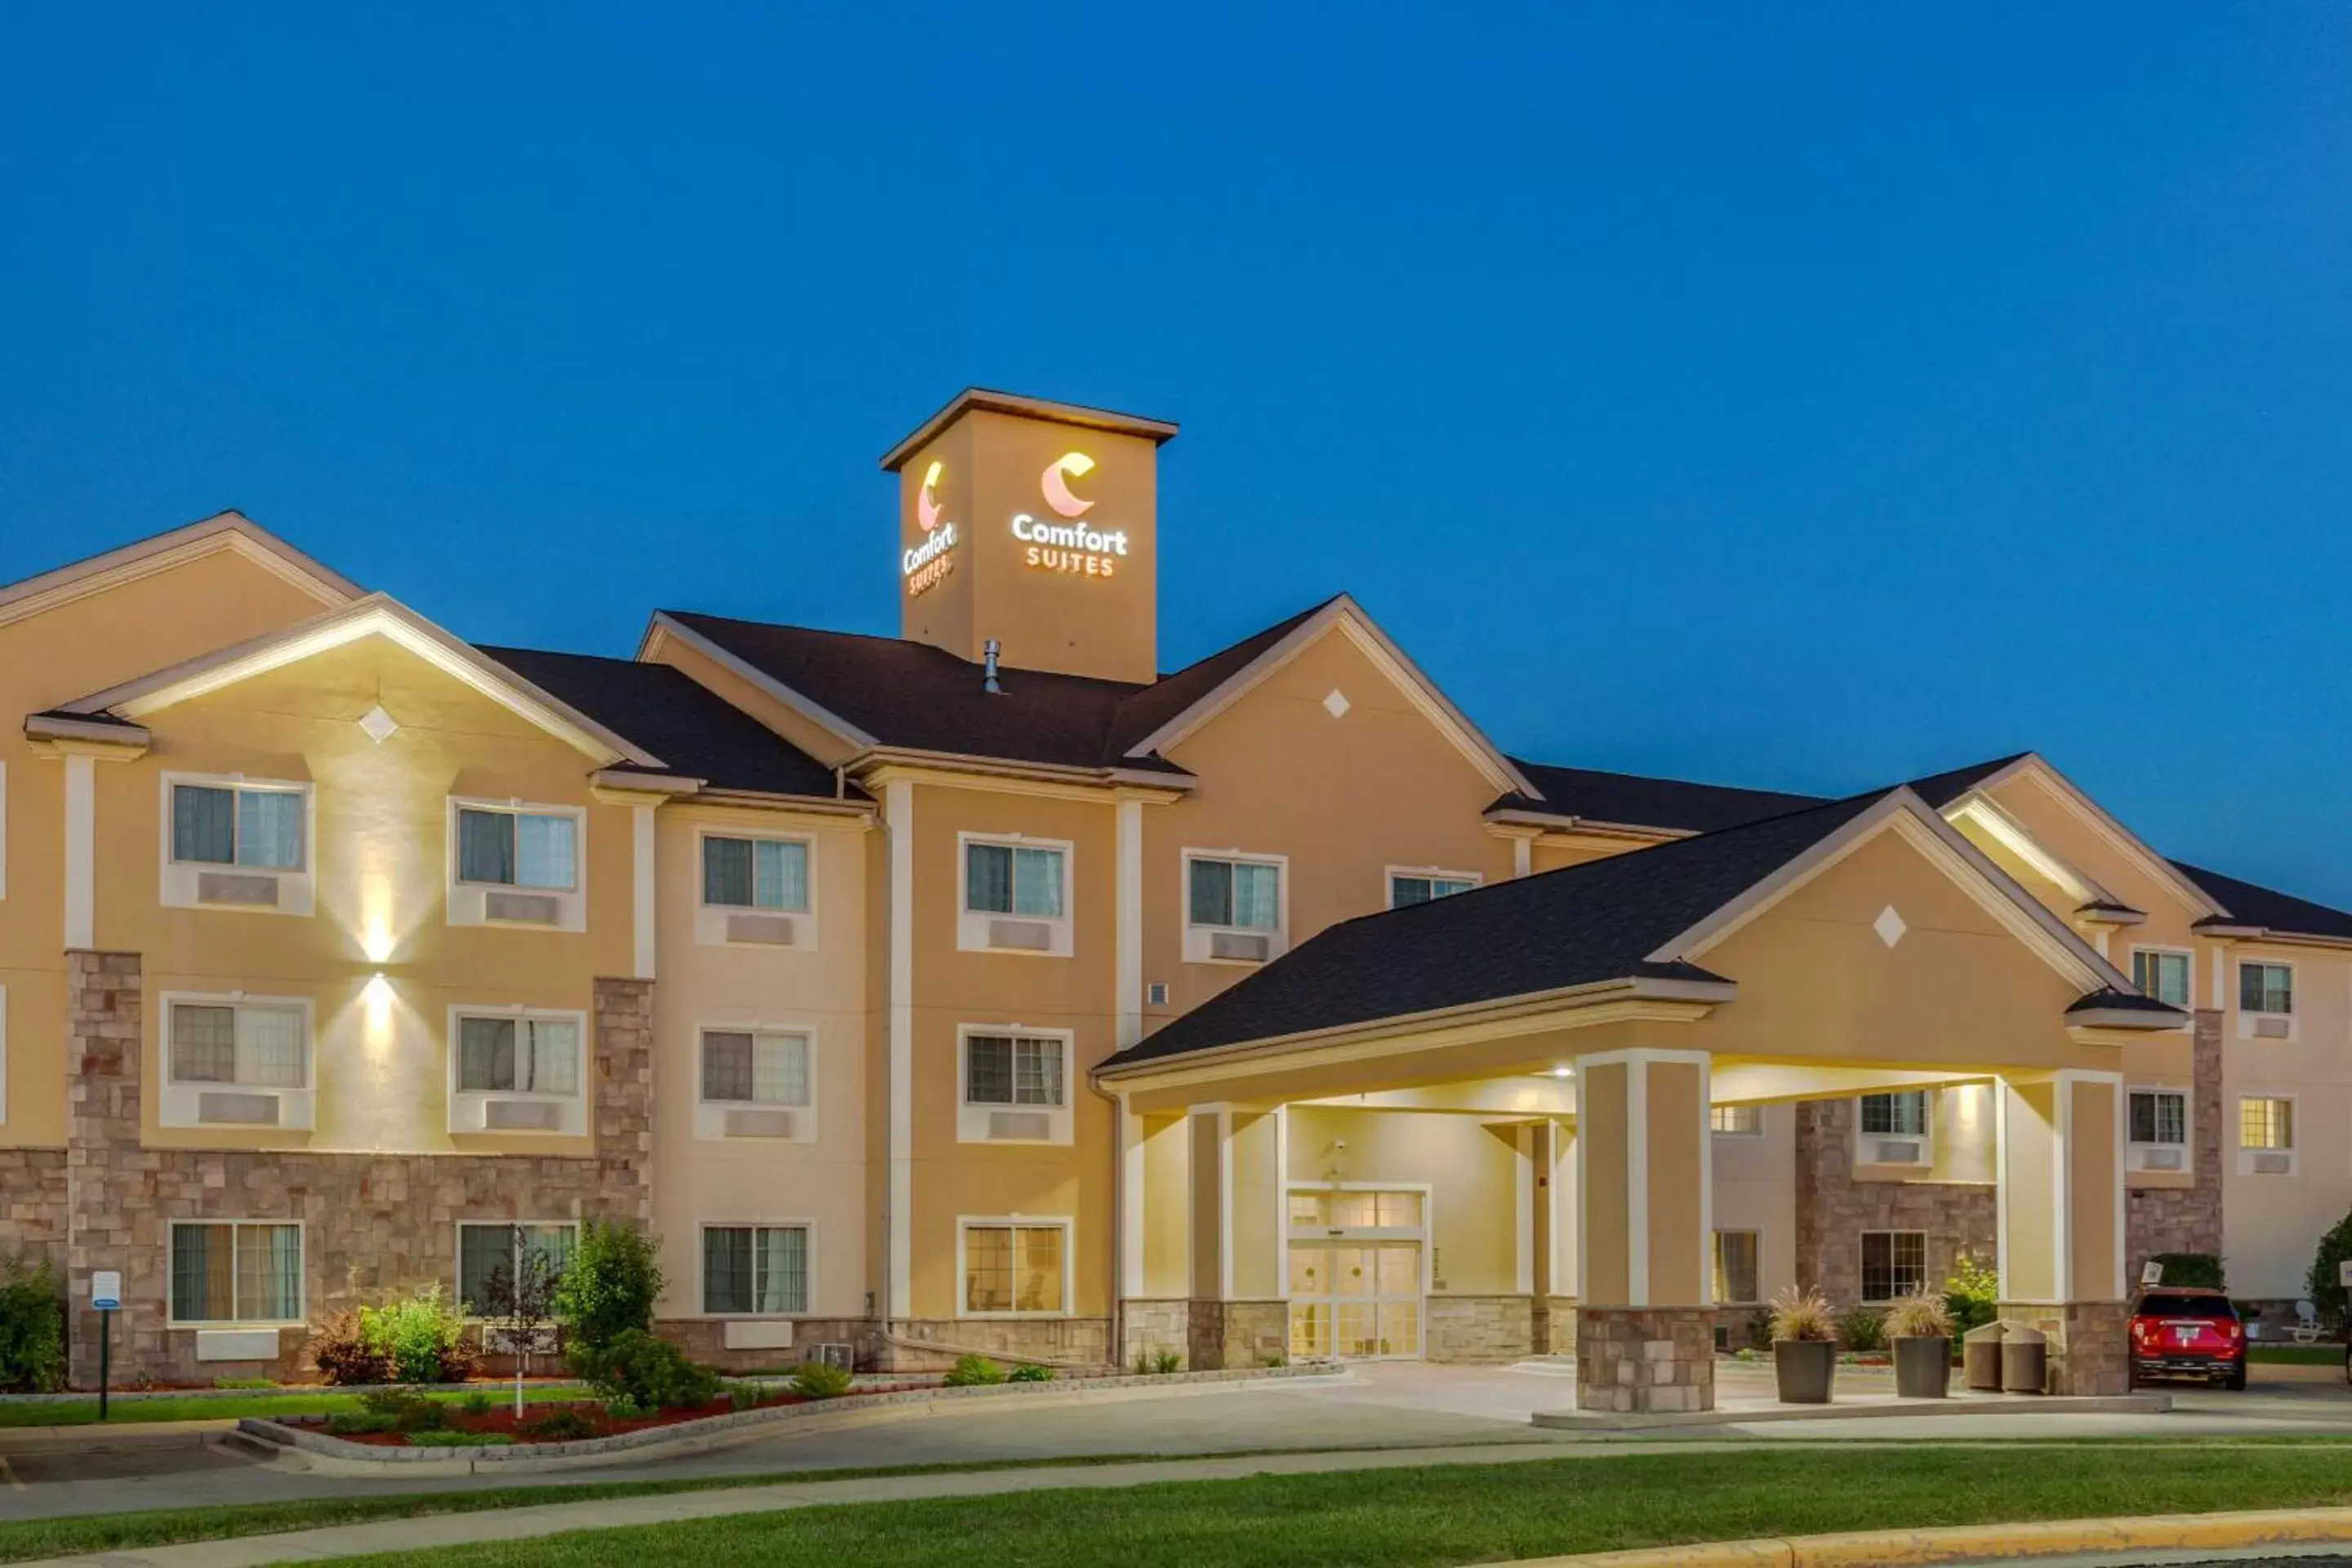 Property Building in Comfort Suites Johnson Creek Conference